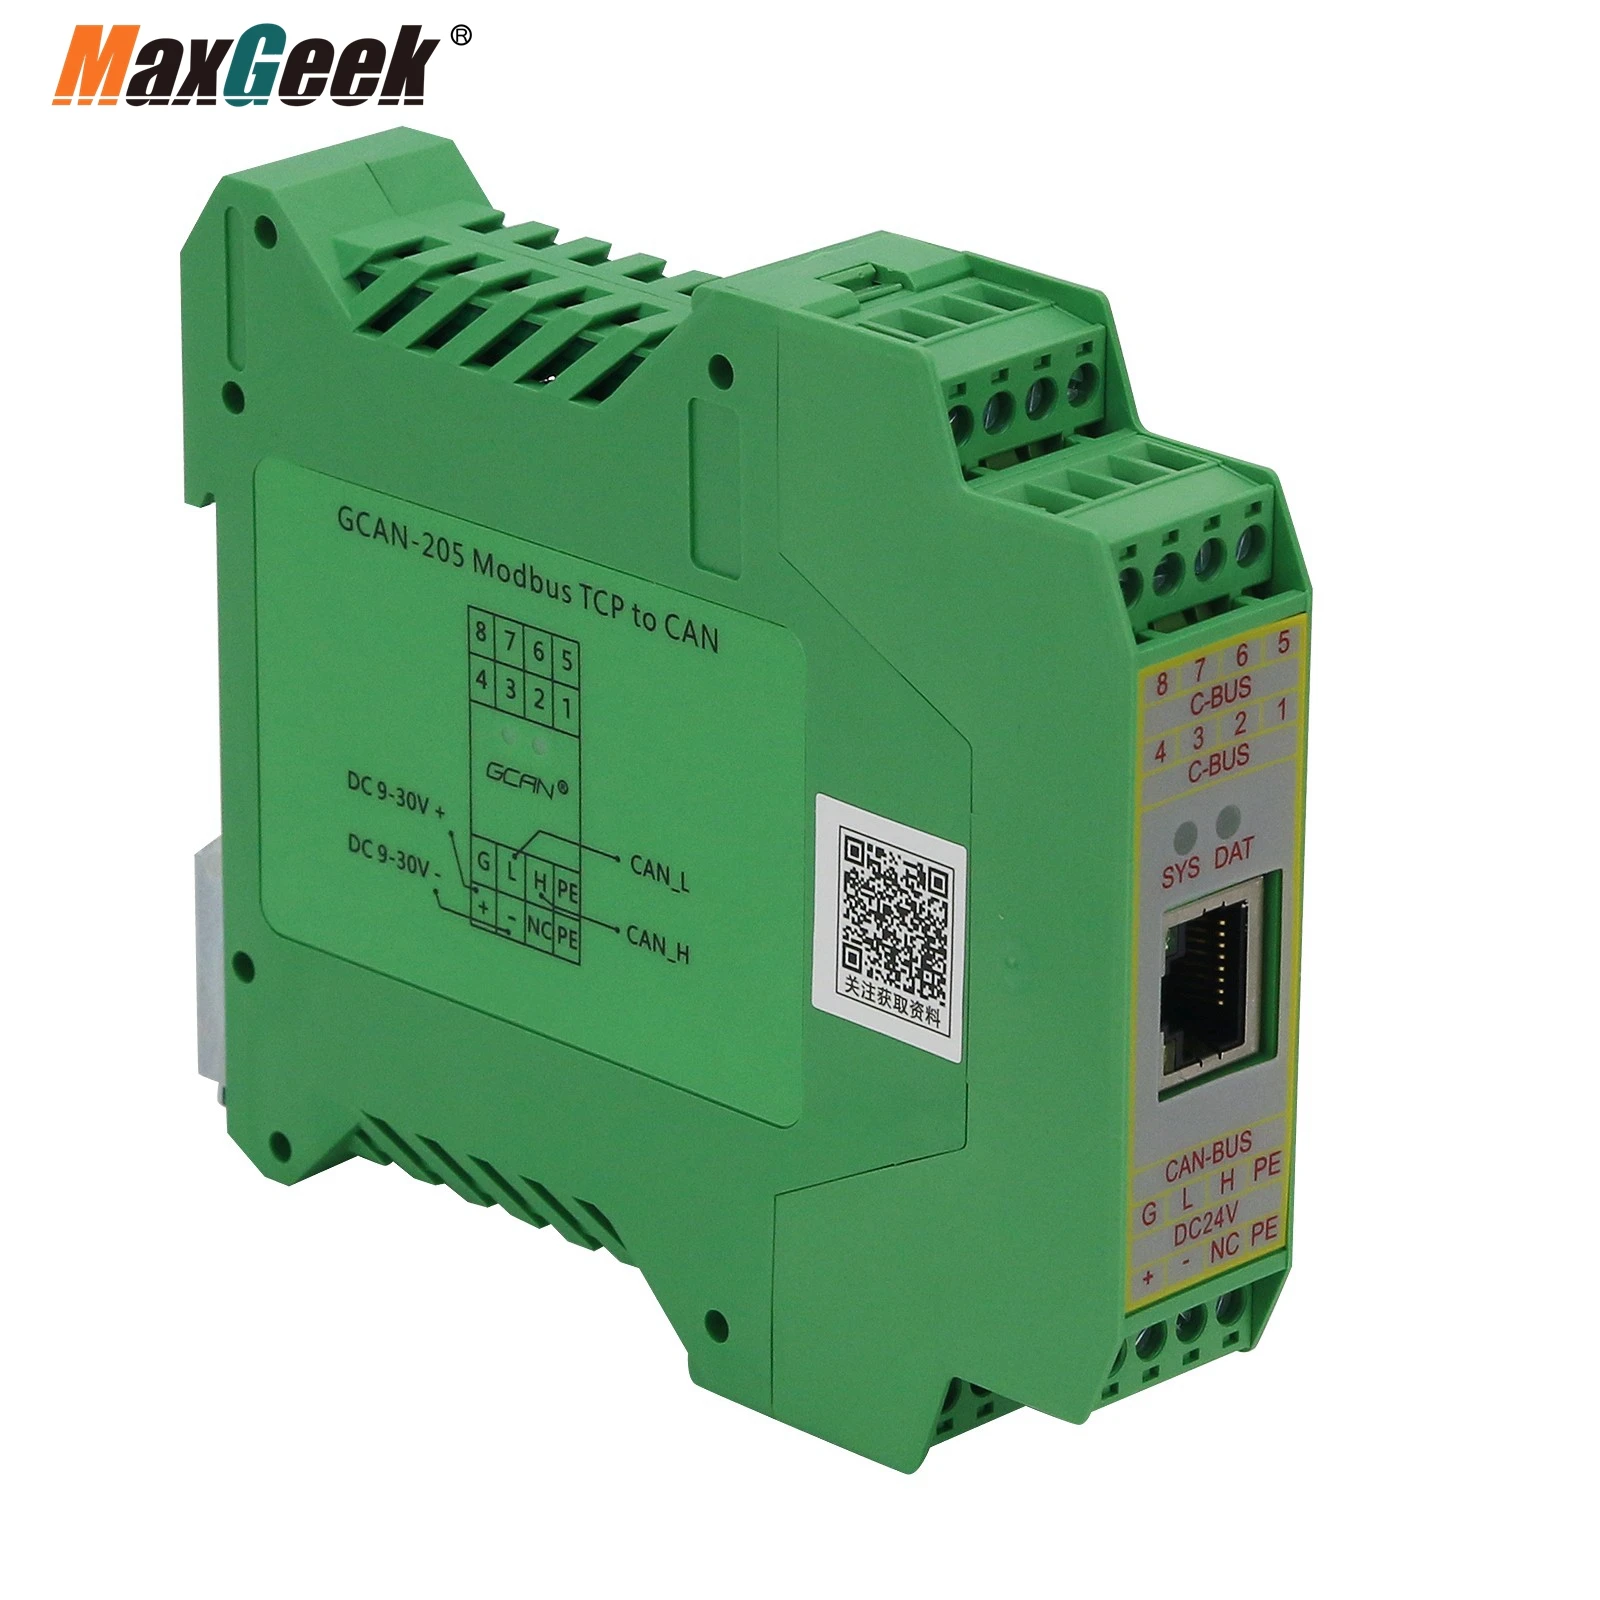 

Maxgeek GCAN-204 Modbus RTU to CAN Bus Converter CANOPEN Bus Gateway for Serial and CAN-Bus Connection